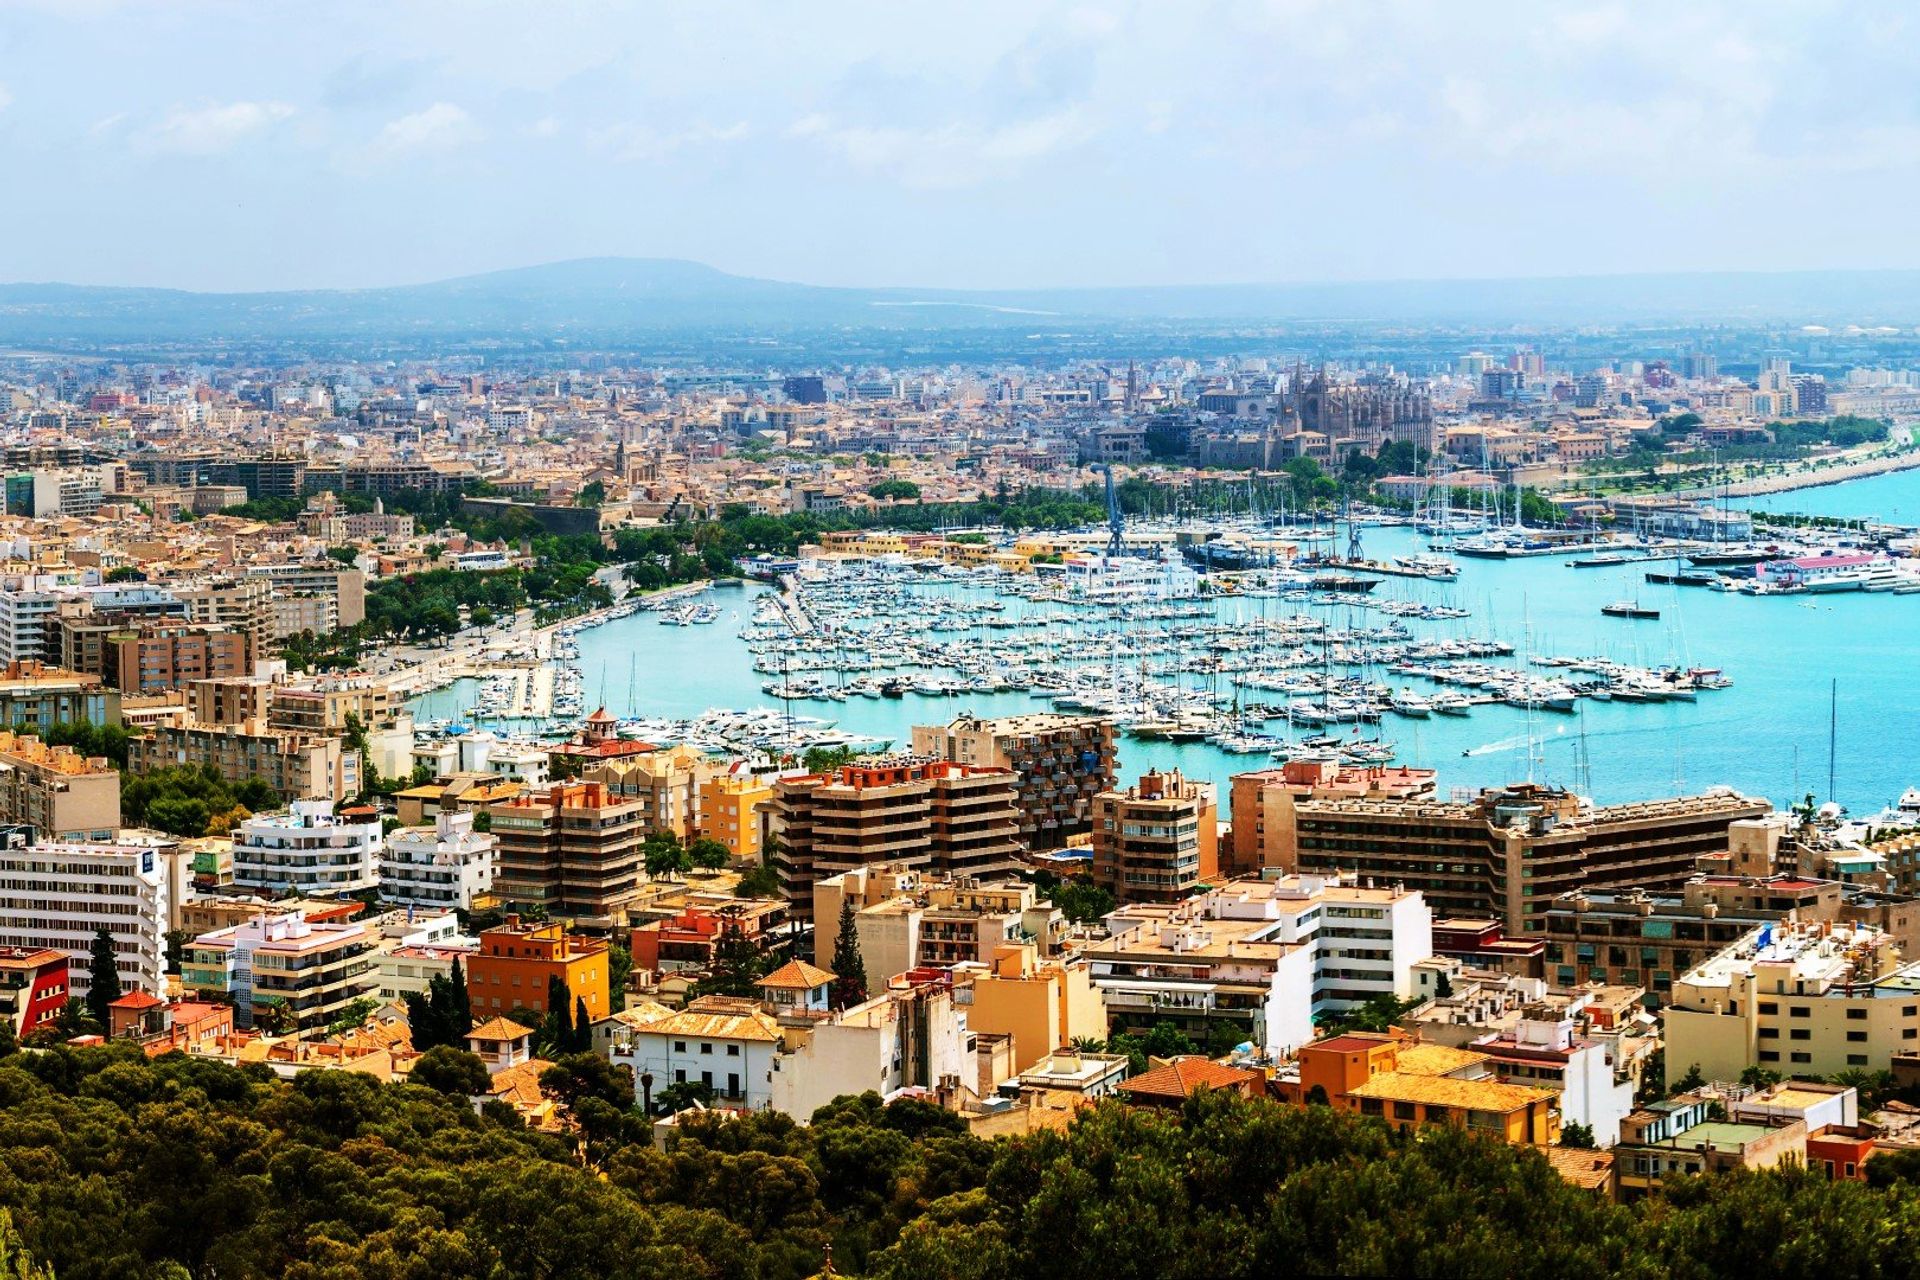 If a vibrant holiday by the coast is what you're after, Majorca's capital, Palma, is the perfect option